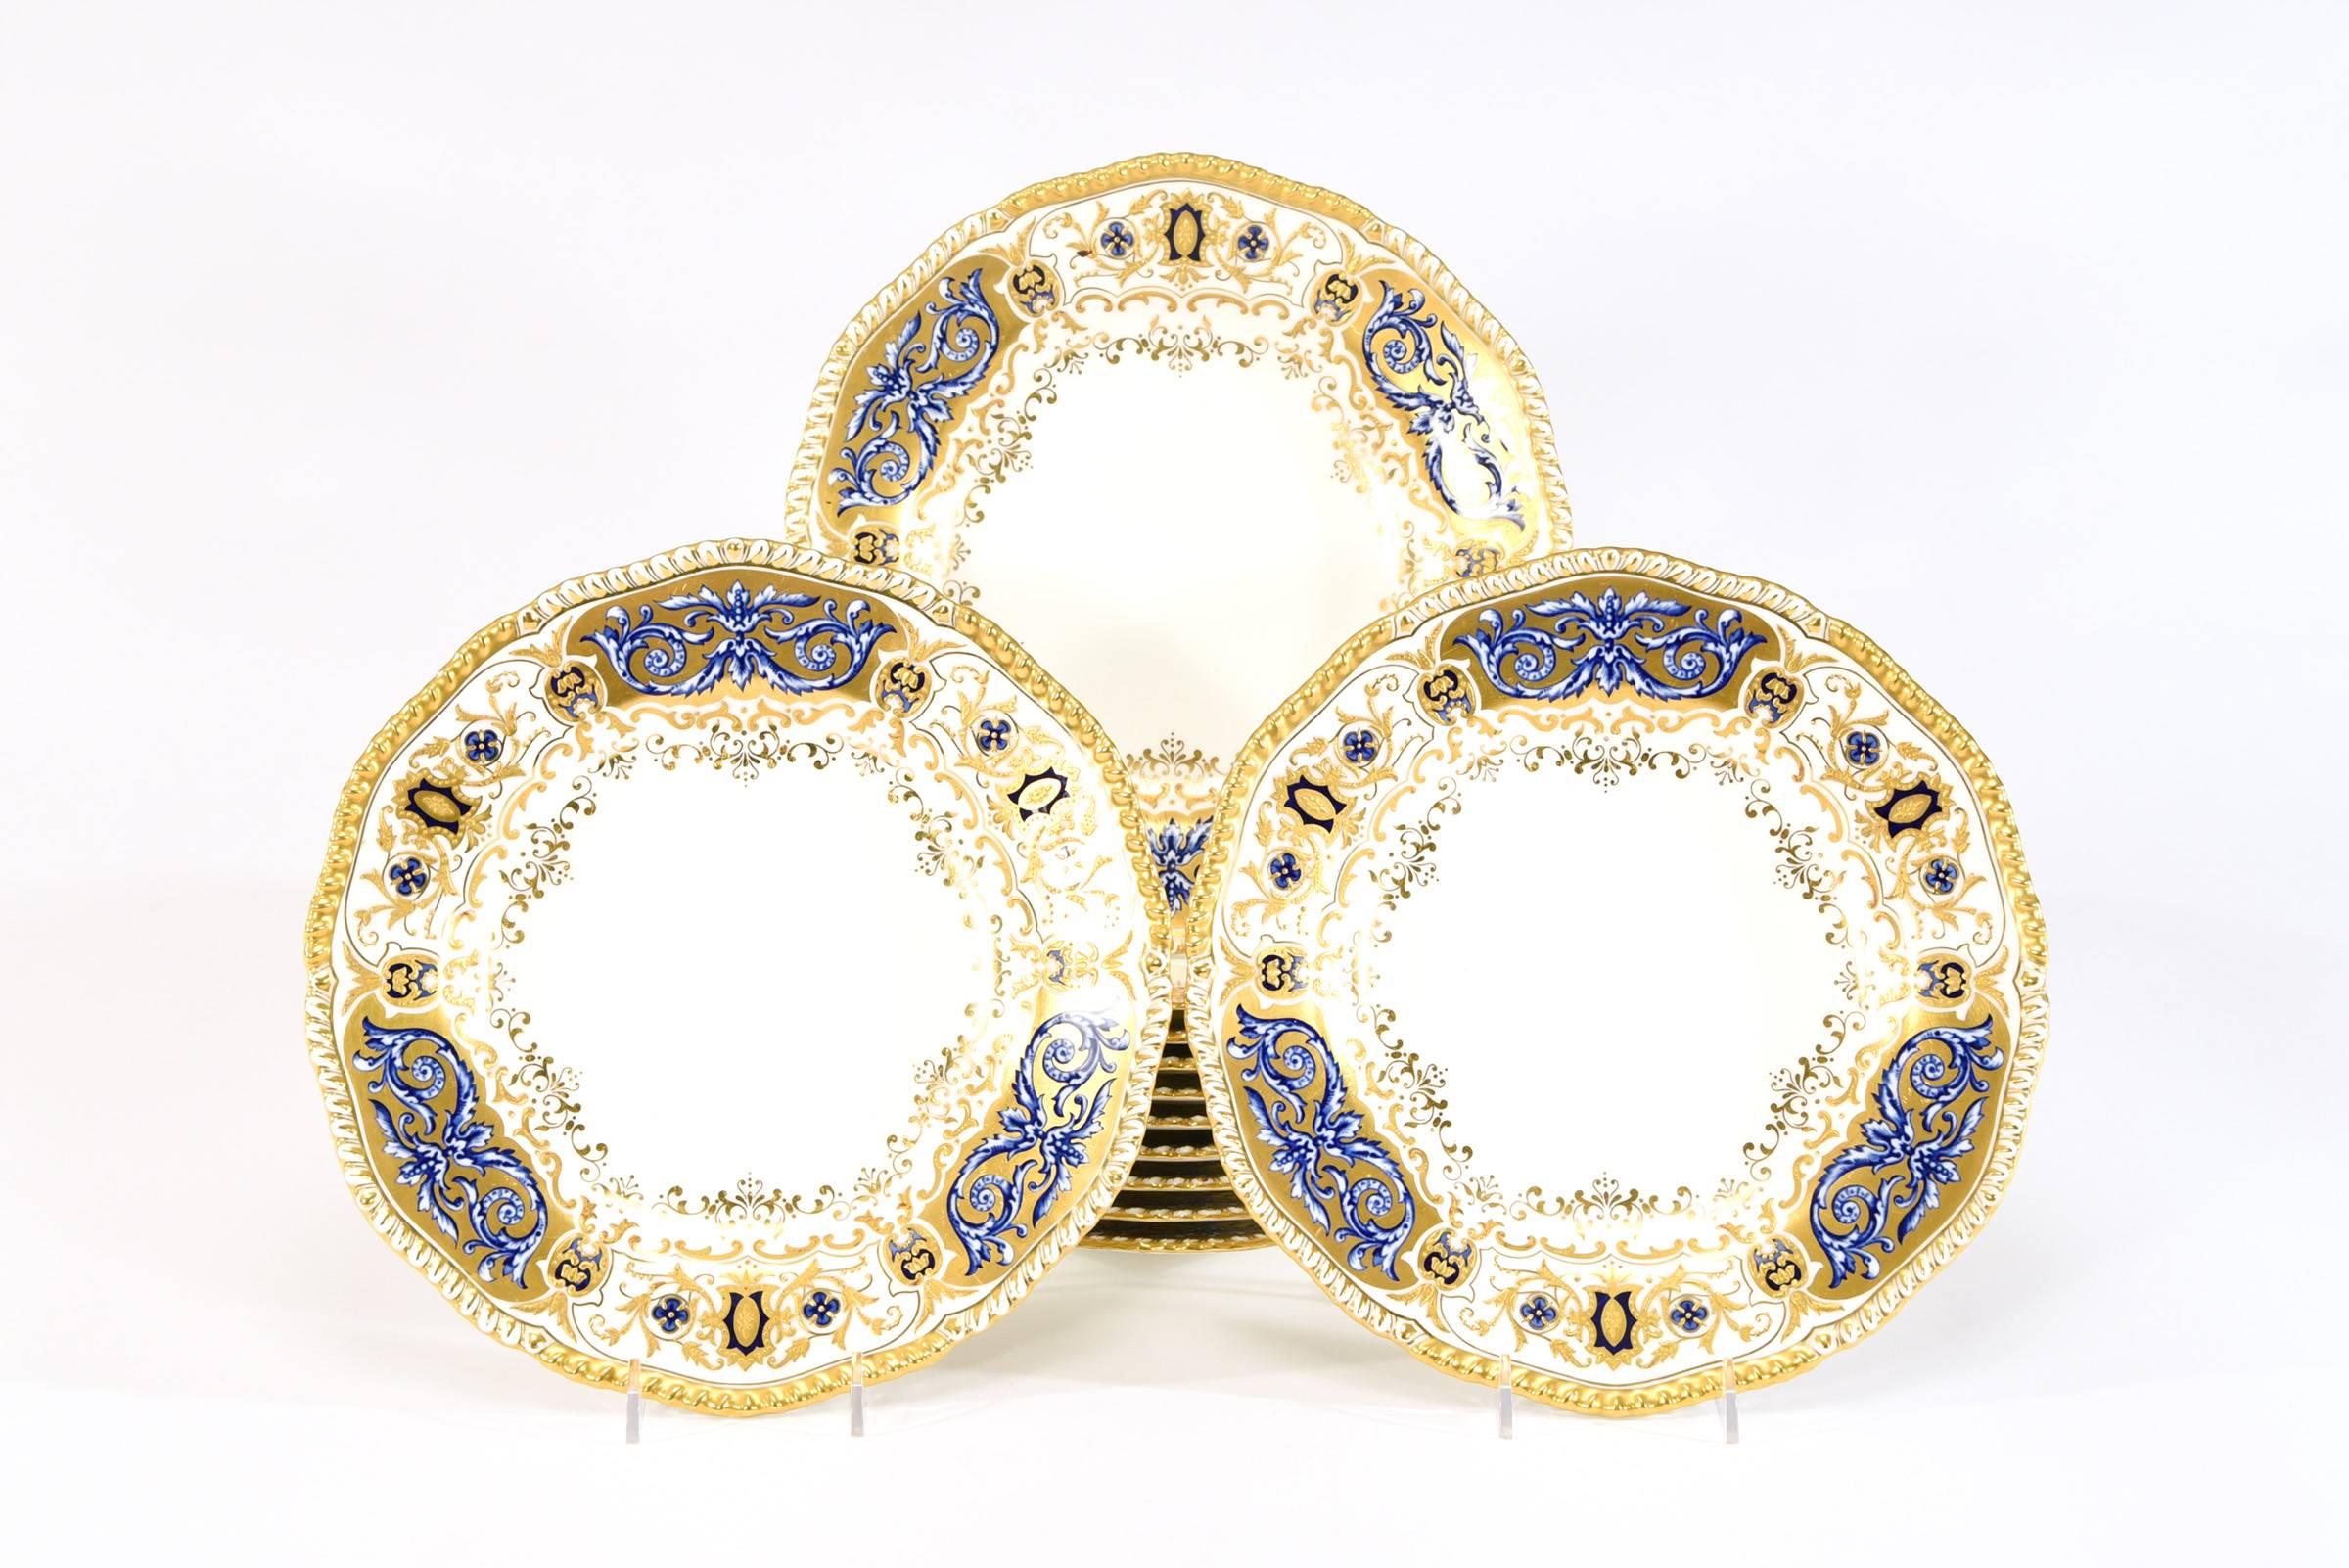 A set of 12 rare Coalport, made for Tiffany and Co. dinner plates featuring six alternating reserves of two colors of cobalt blue enamel with profuse raised paste gold overlay. The plates are framed by a gilded gadroon border. The exquisite